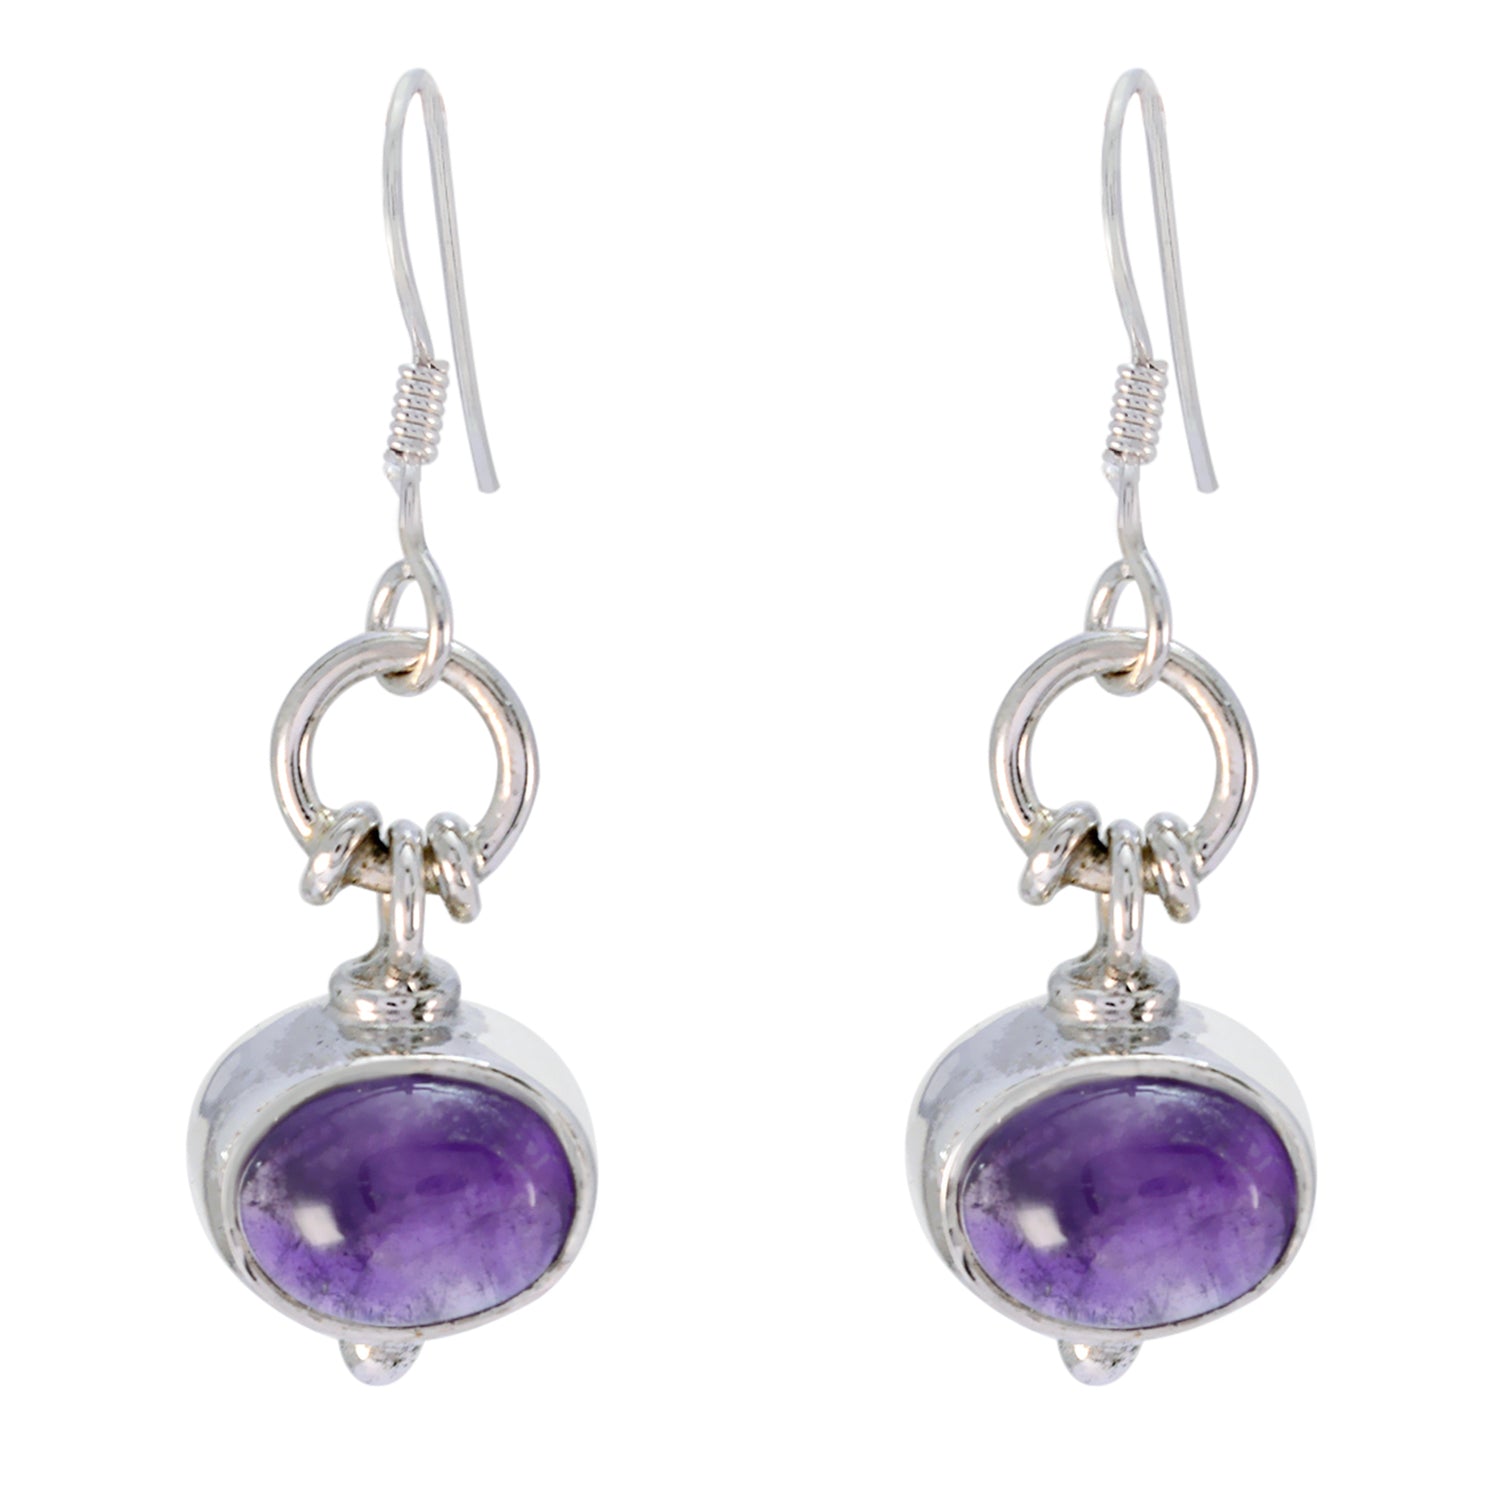 Riyo Genuine Gems oval Cabochon Purple Amethyst Silver Earrings gift for daughter's day